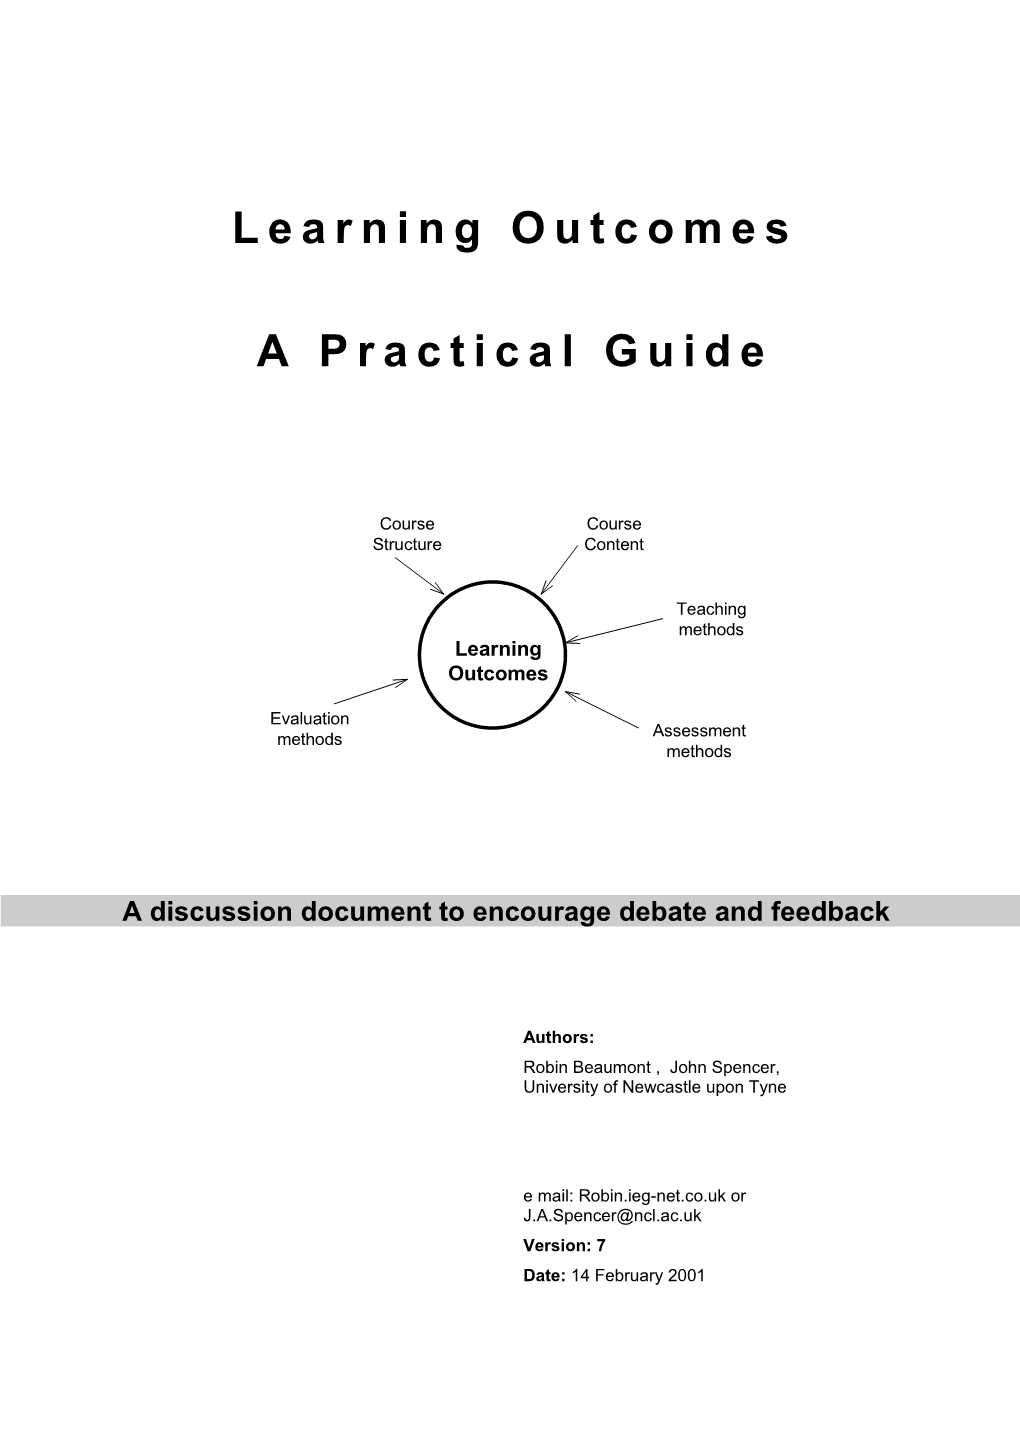 Learning Outcomes - a Practical Guide